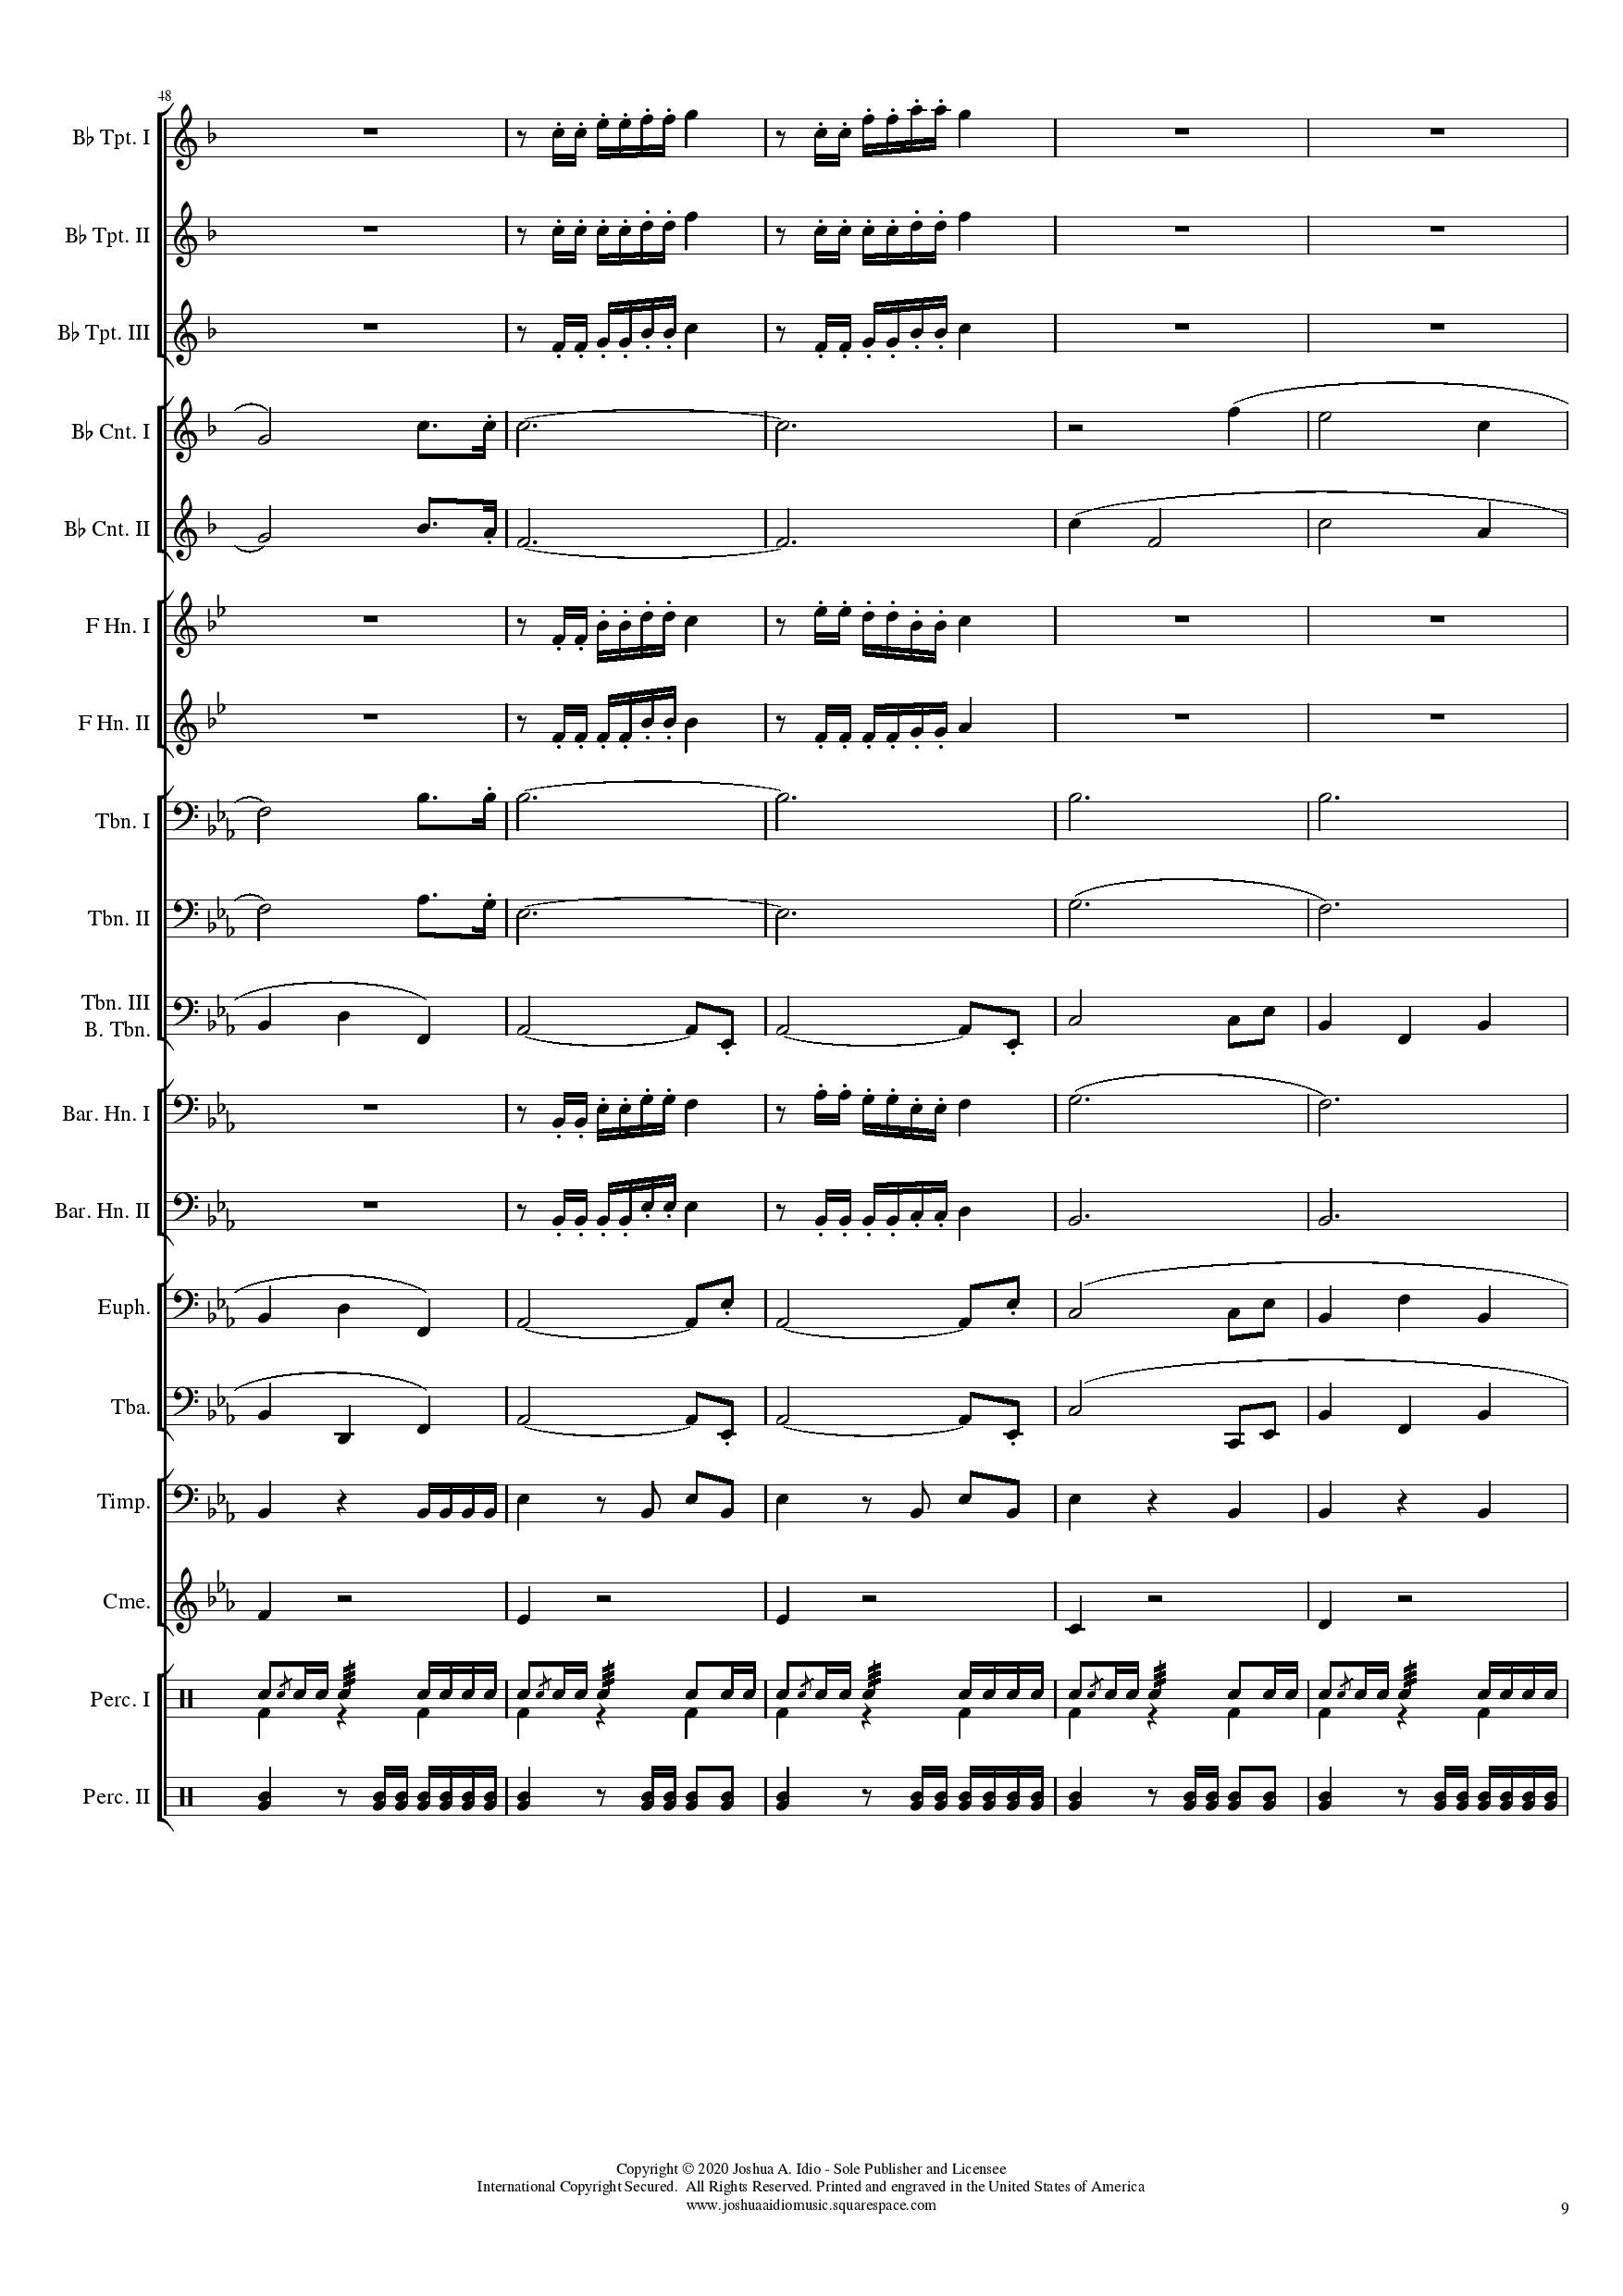 The Procession of Scholars - Conductor s Score-page-009.jpg